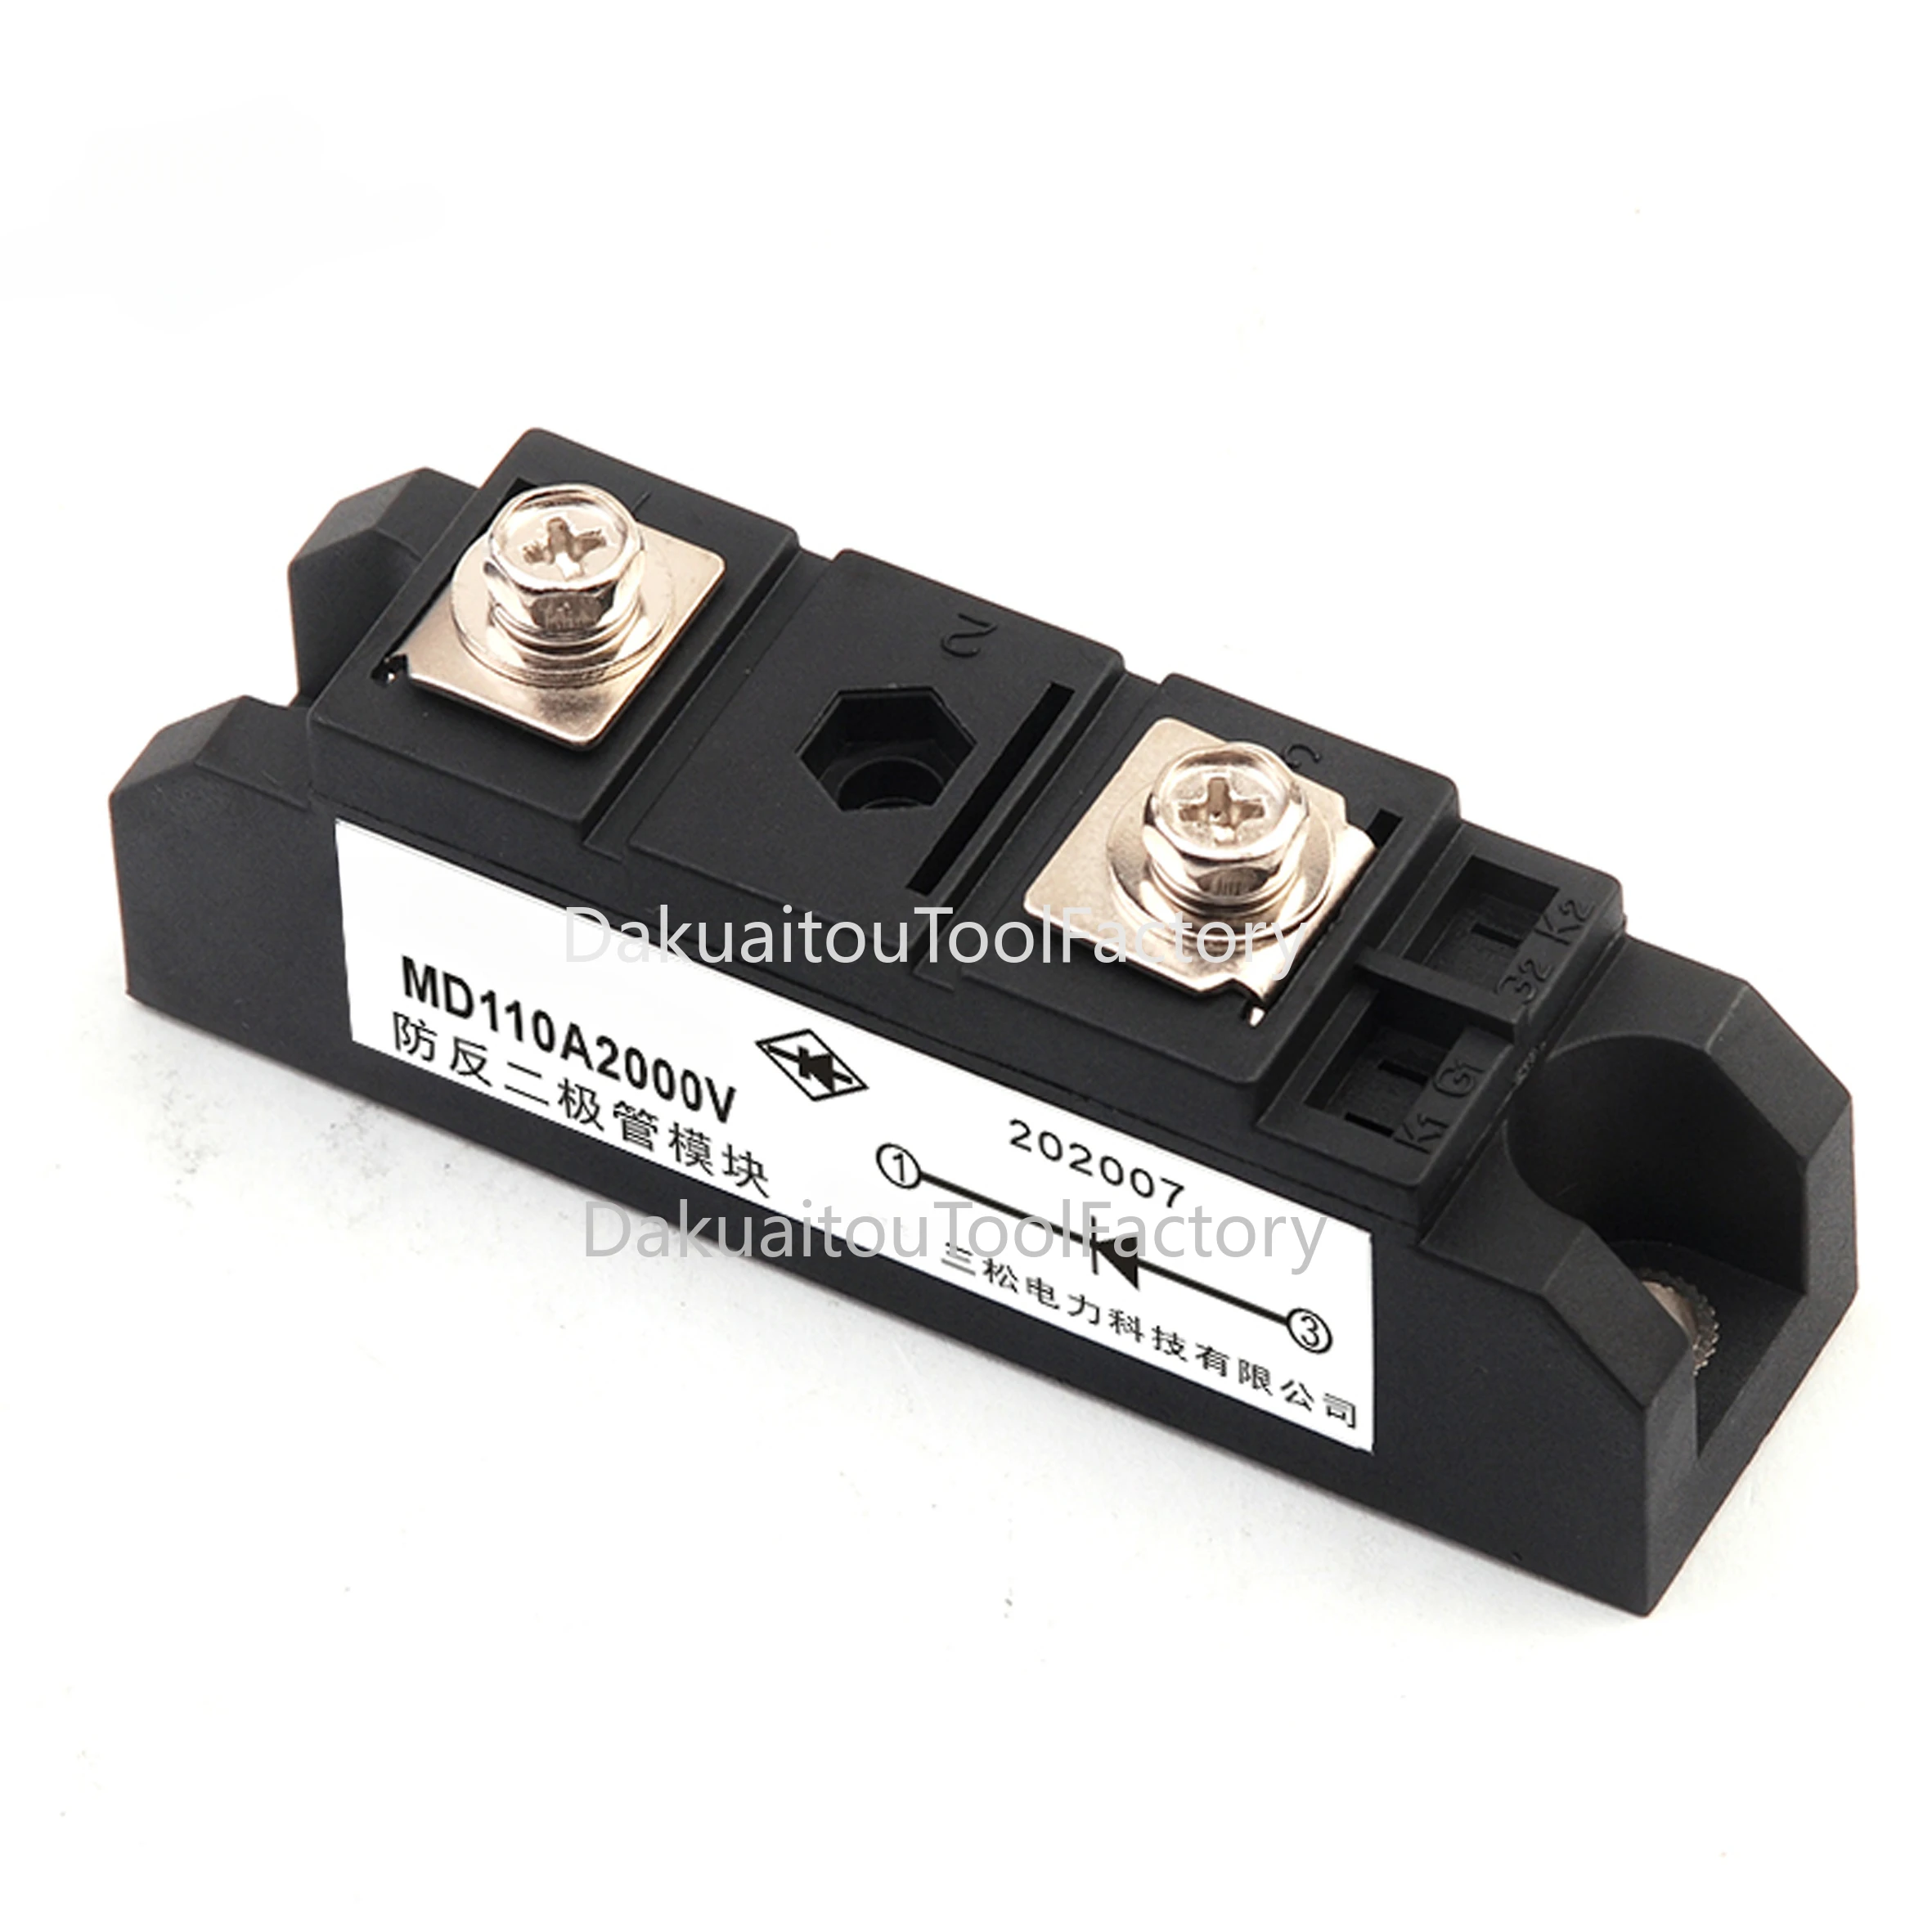 

MD110A 160 200A 300A 400 1600V 2000V High Power Anti-reverse Continuous Current Diode Module